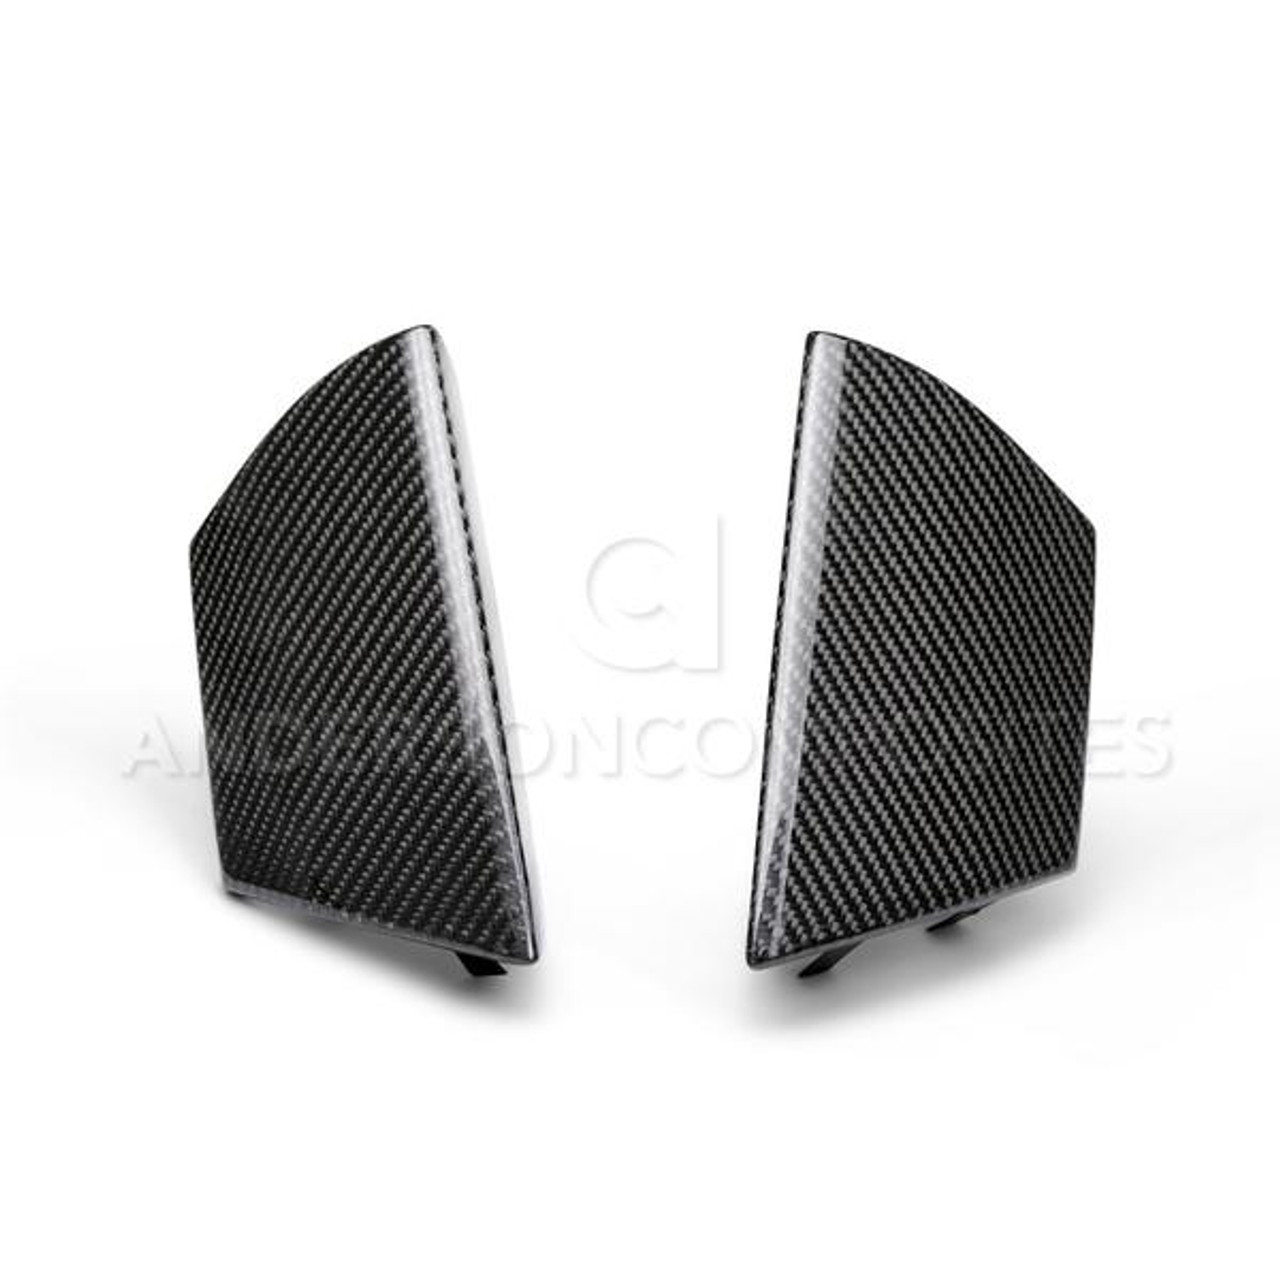 Anderson Composites 2015-2018 Mustang Shelby GT350 Carbon Fiber Front Upper Grille Inserts